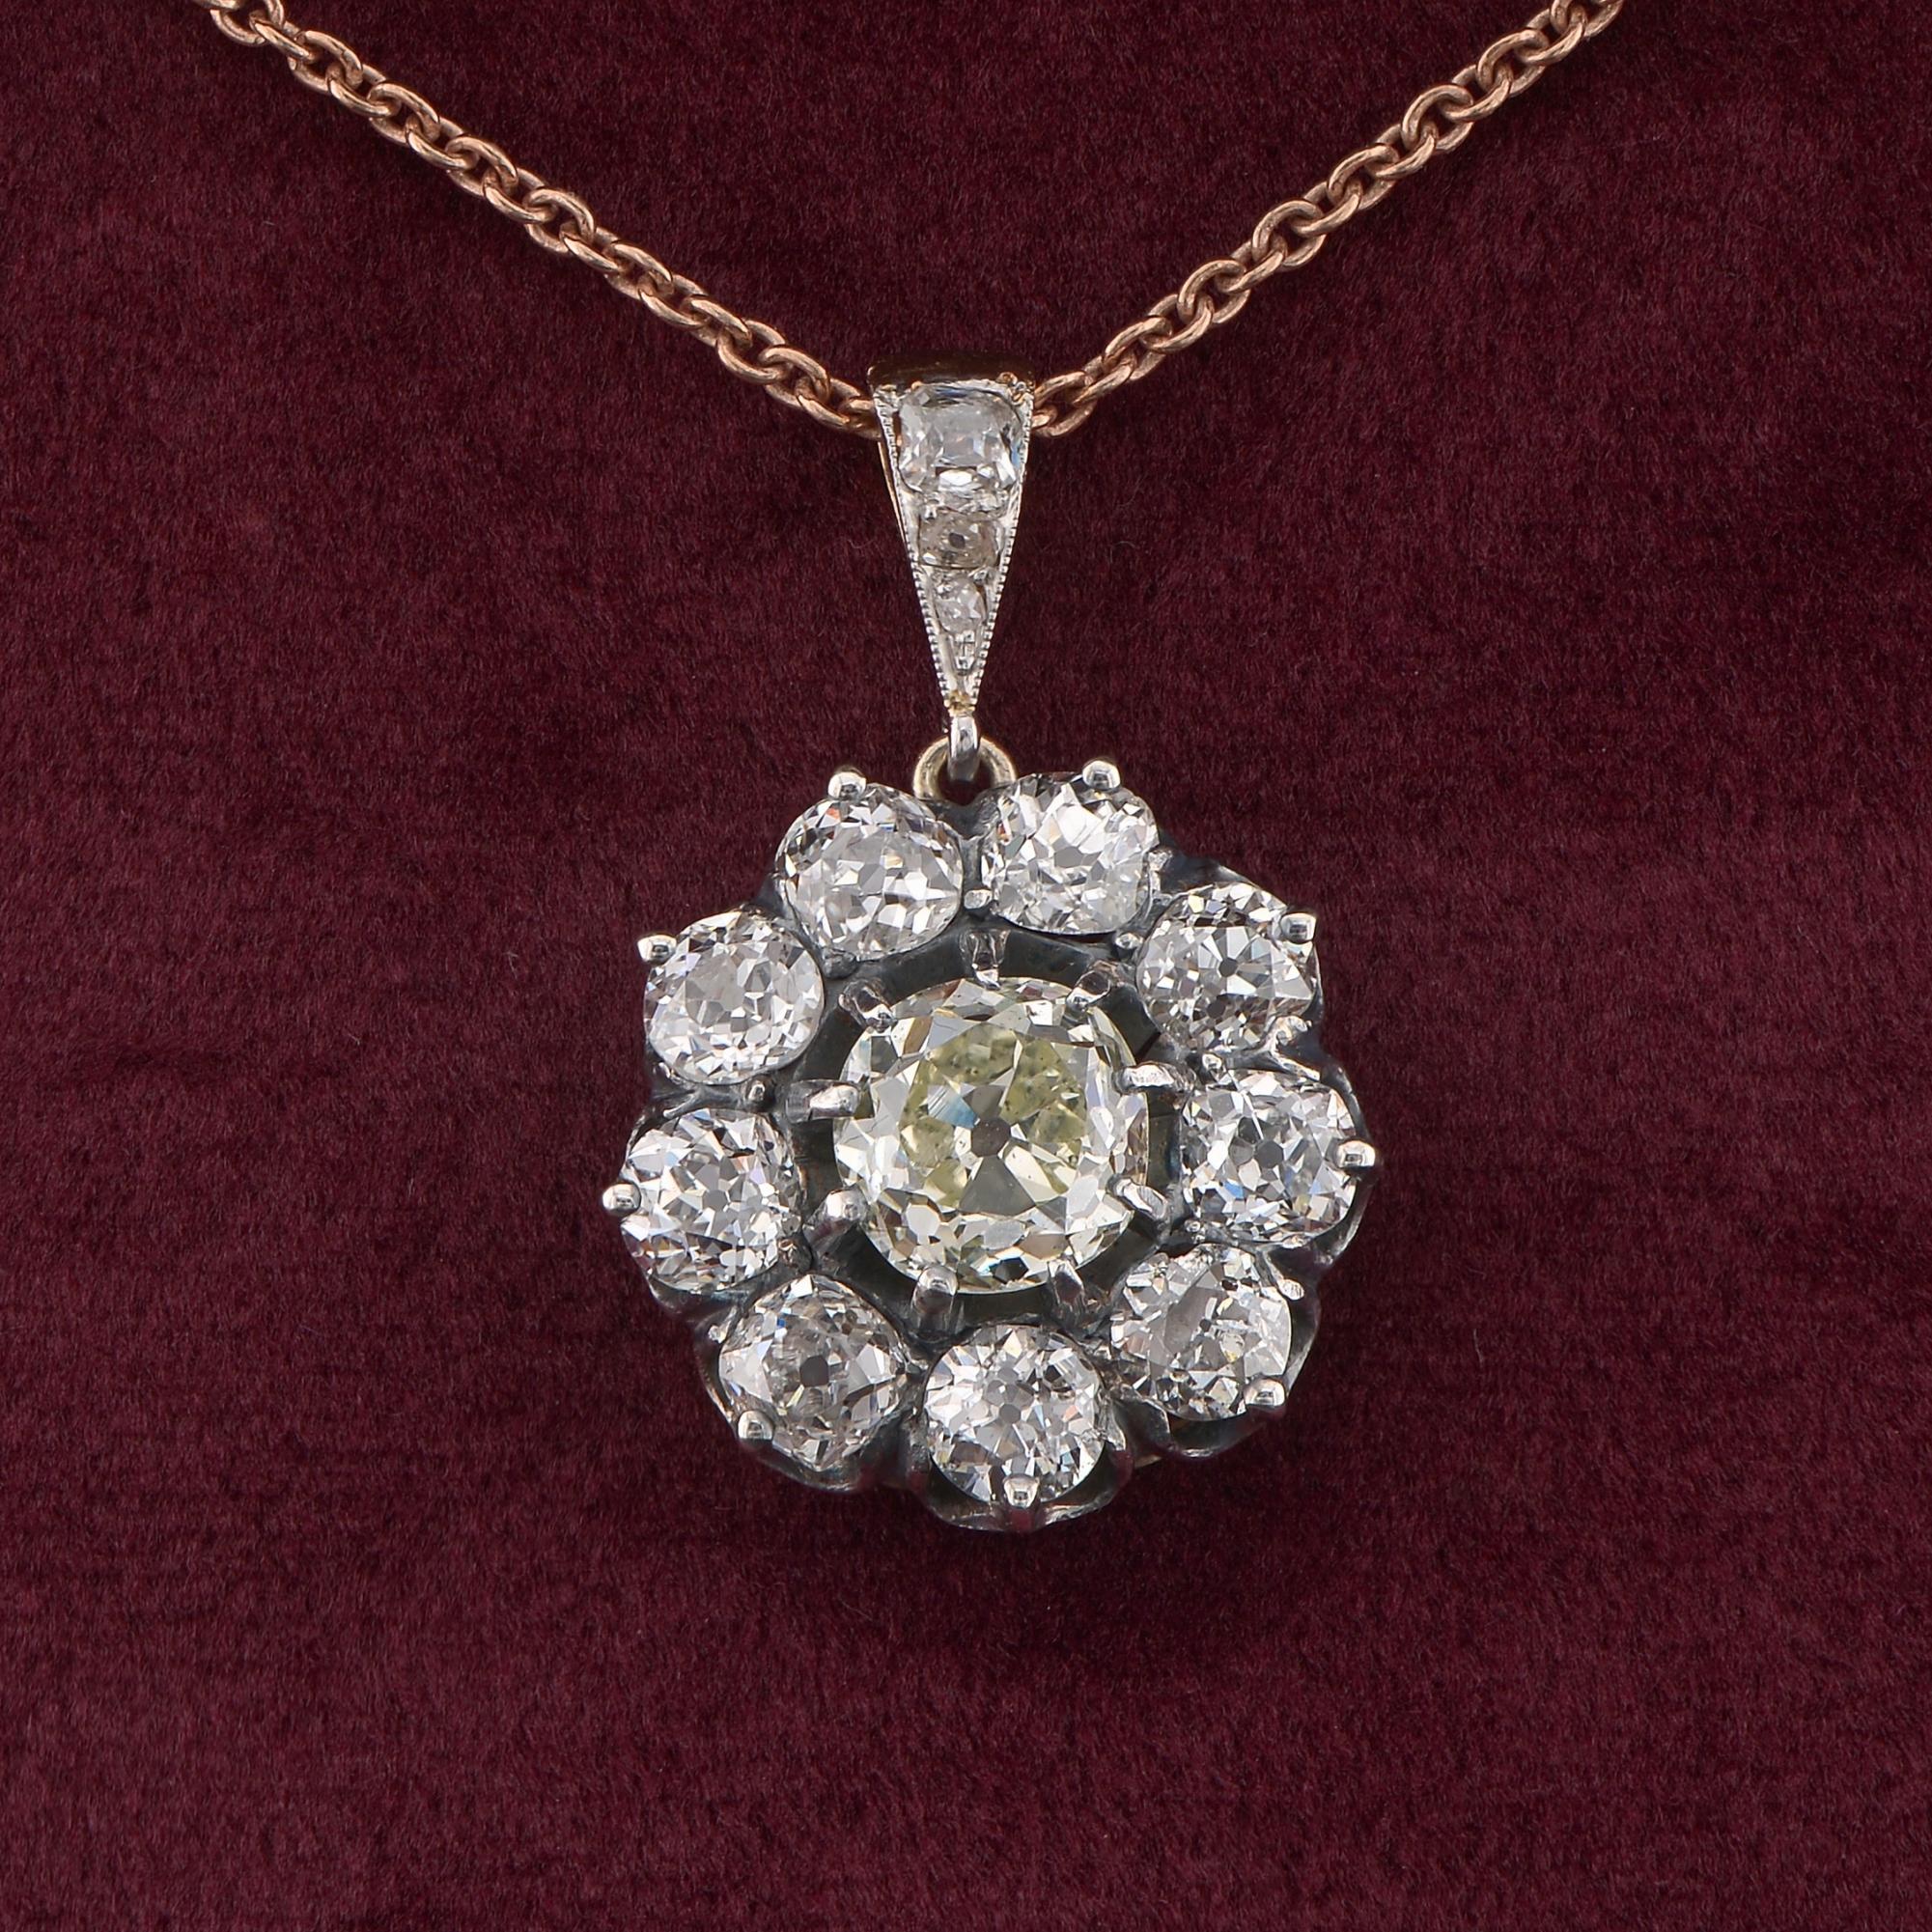 Impressed into Eternity
This stunning Victorian Diamond pendant is original 1870 ca
A beautiful large sized flower in the shape of a Daisy is skillful hand crafted in the glorious Victorian workmanship, tested for 18 KT gold /silver top
Adorned with